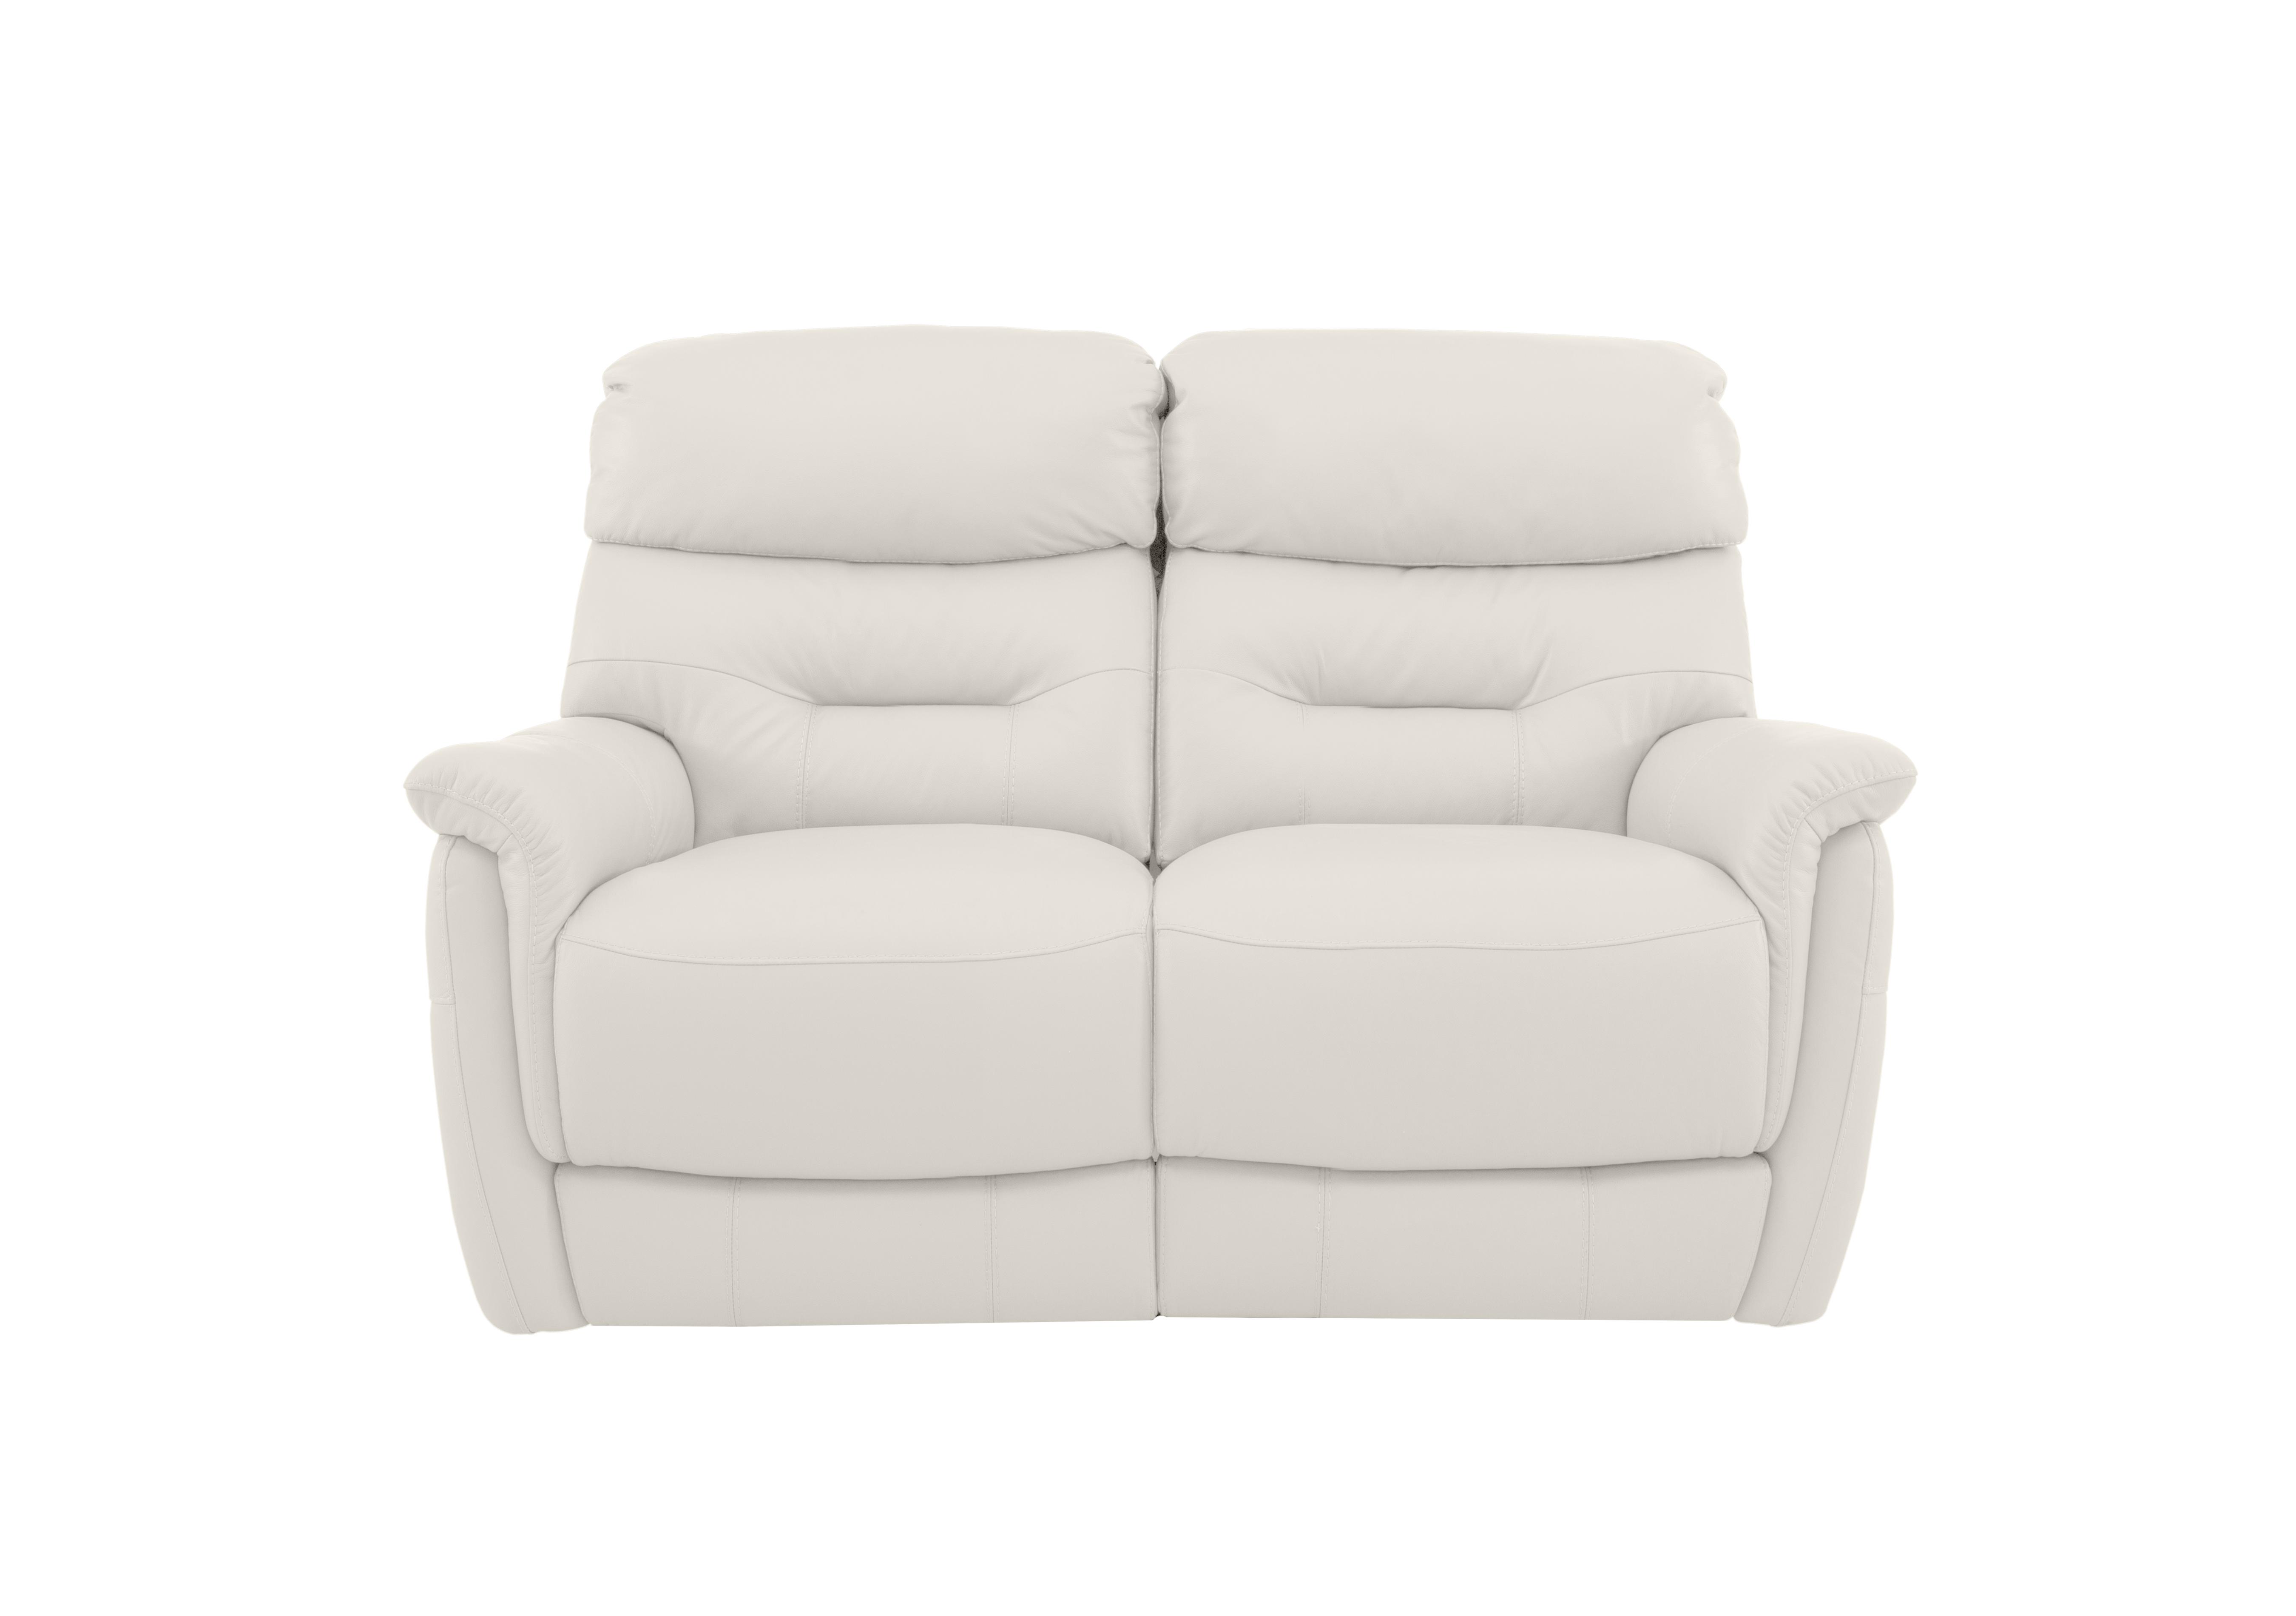 Chicago 2 Seater Leather Sofa in Bv-744d Star White on Furniture Village